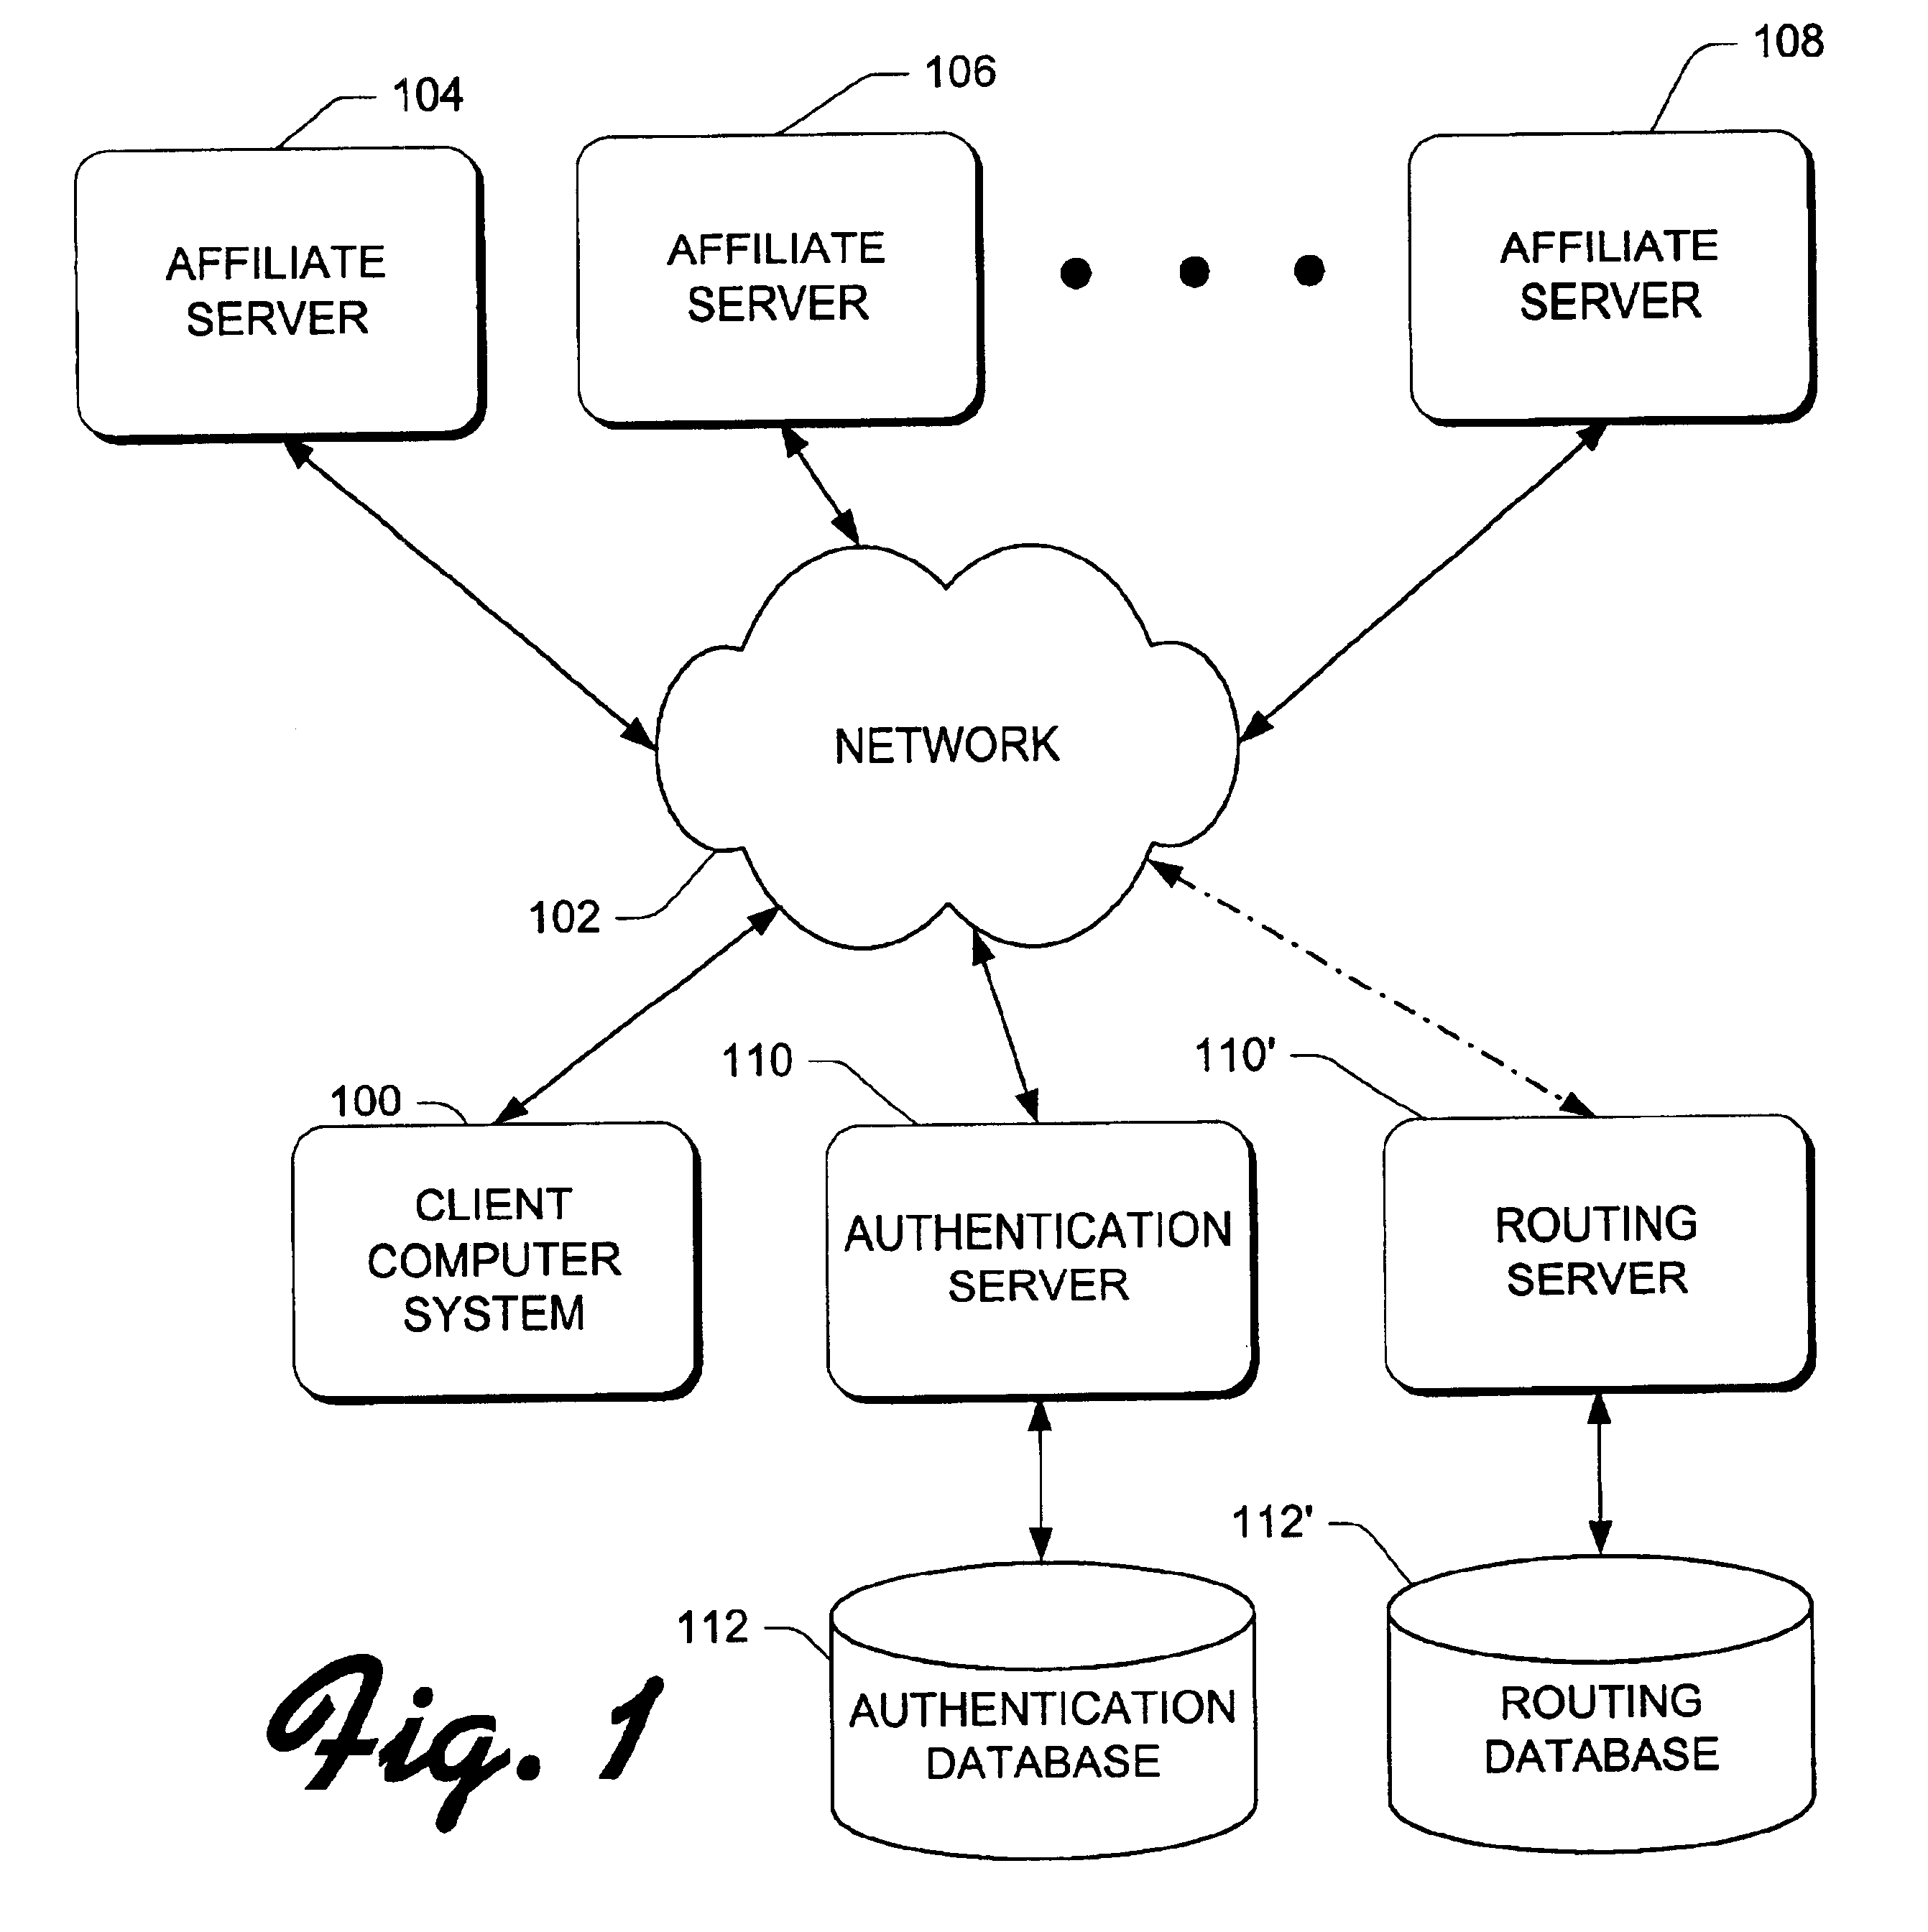 Service routing and web integration in a distributed multi-site user authentication system